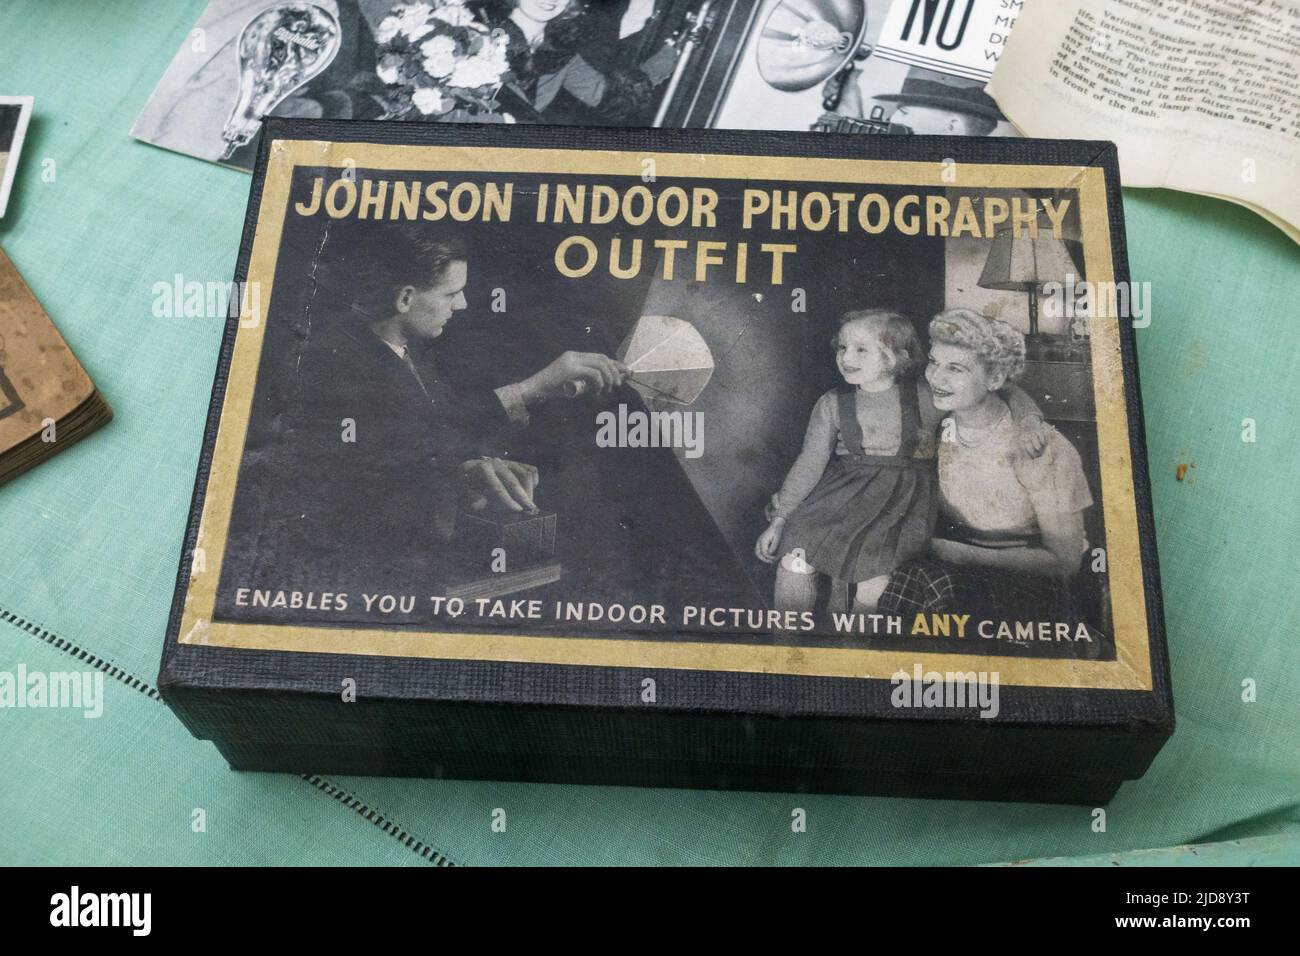 The Johnson Indoor Photography Outfit used to help take photographs at home on display in a media museum. Stock Photo